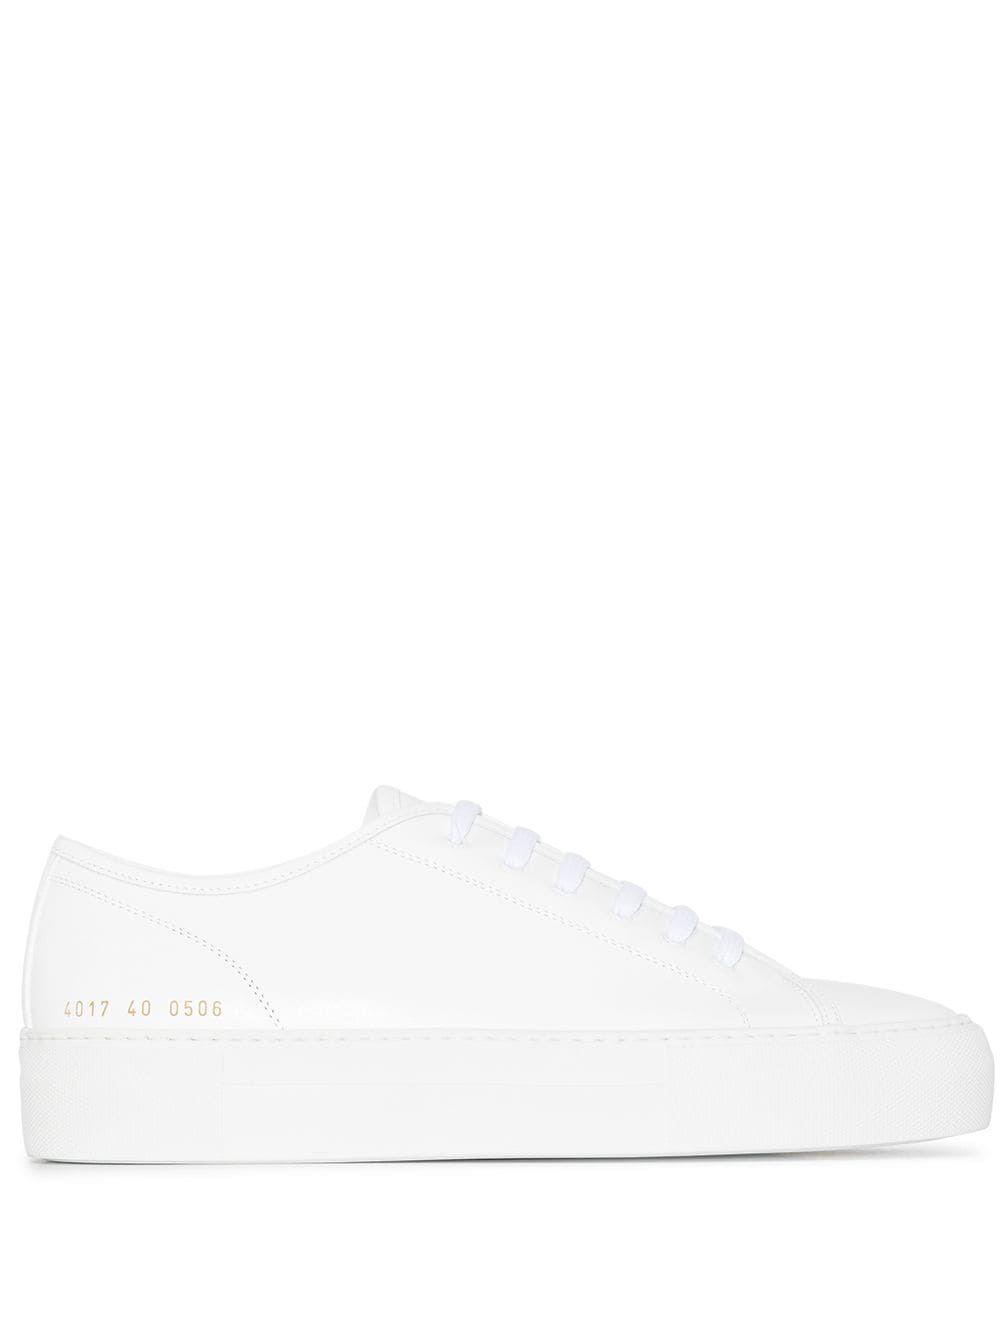 Common Projects Tournament Low Super sneakers - White von Common Projects